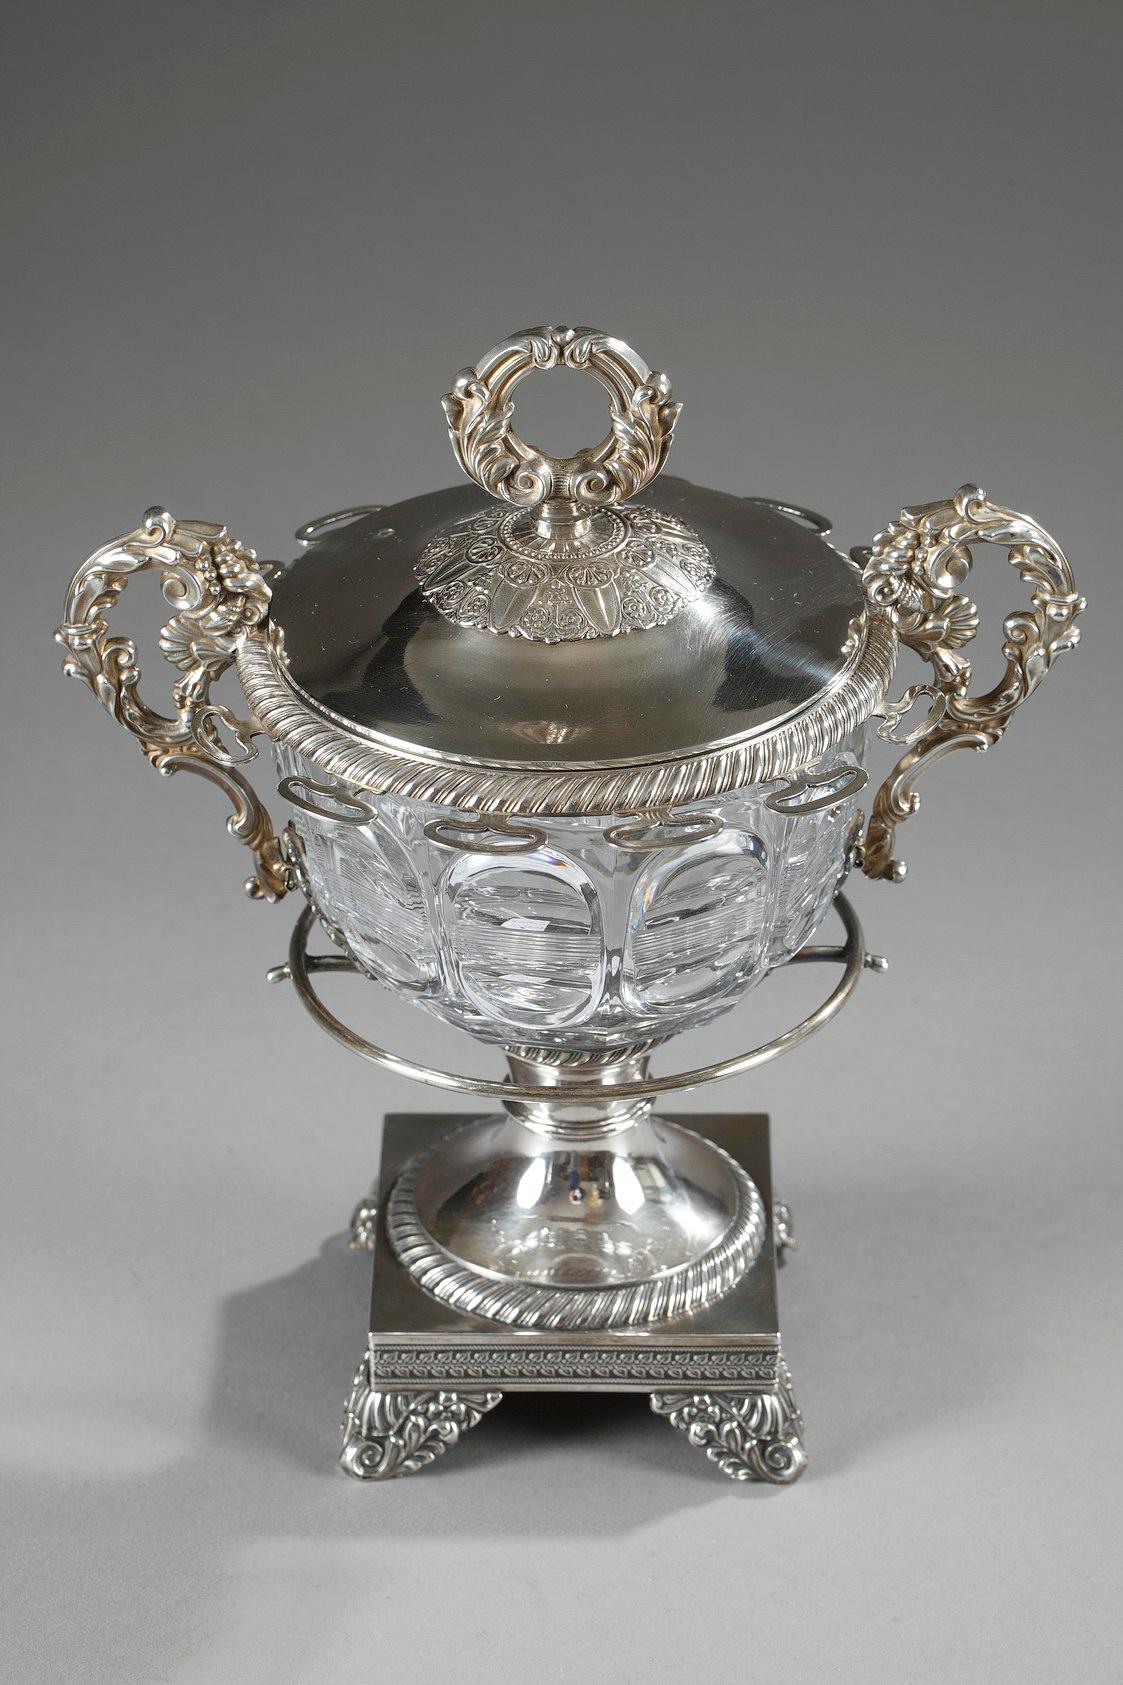 Restauration 19th Century Large Silver and Cut-Crystal Confiturier, with 12 Spoons